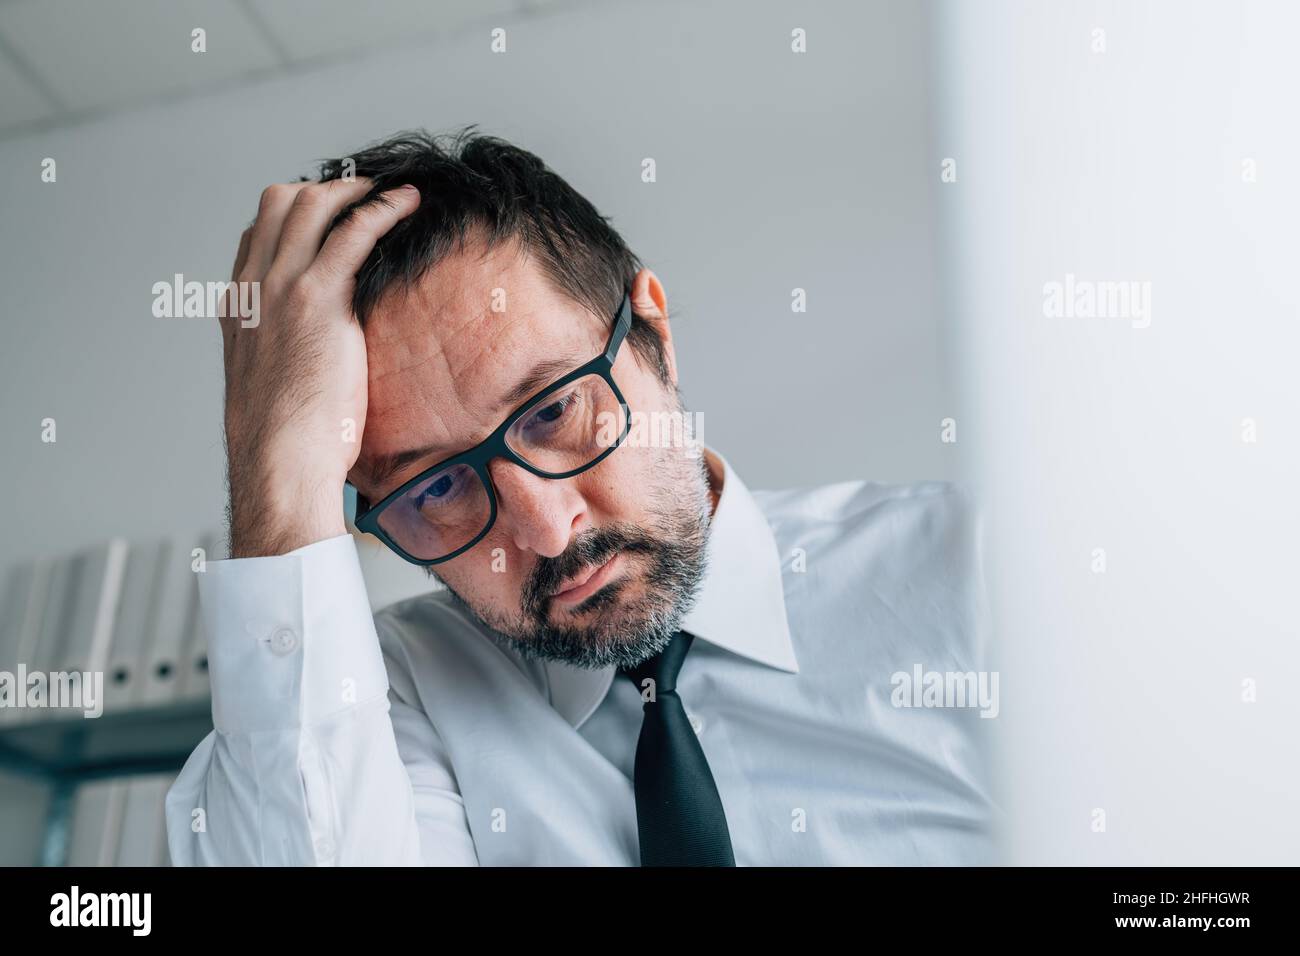 Regretting bad business decision, disappointed businessman in office, selective focus Stock Photo